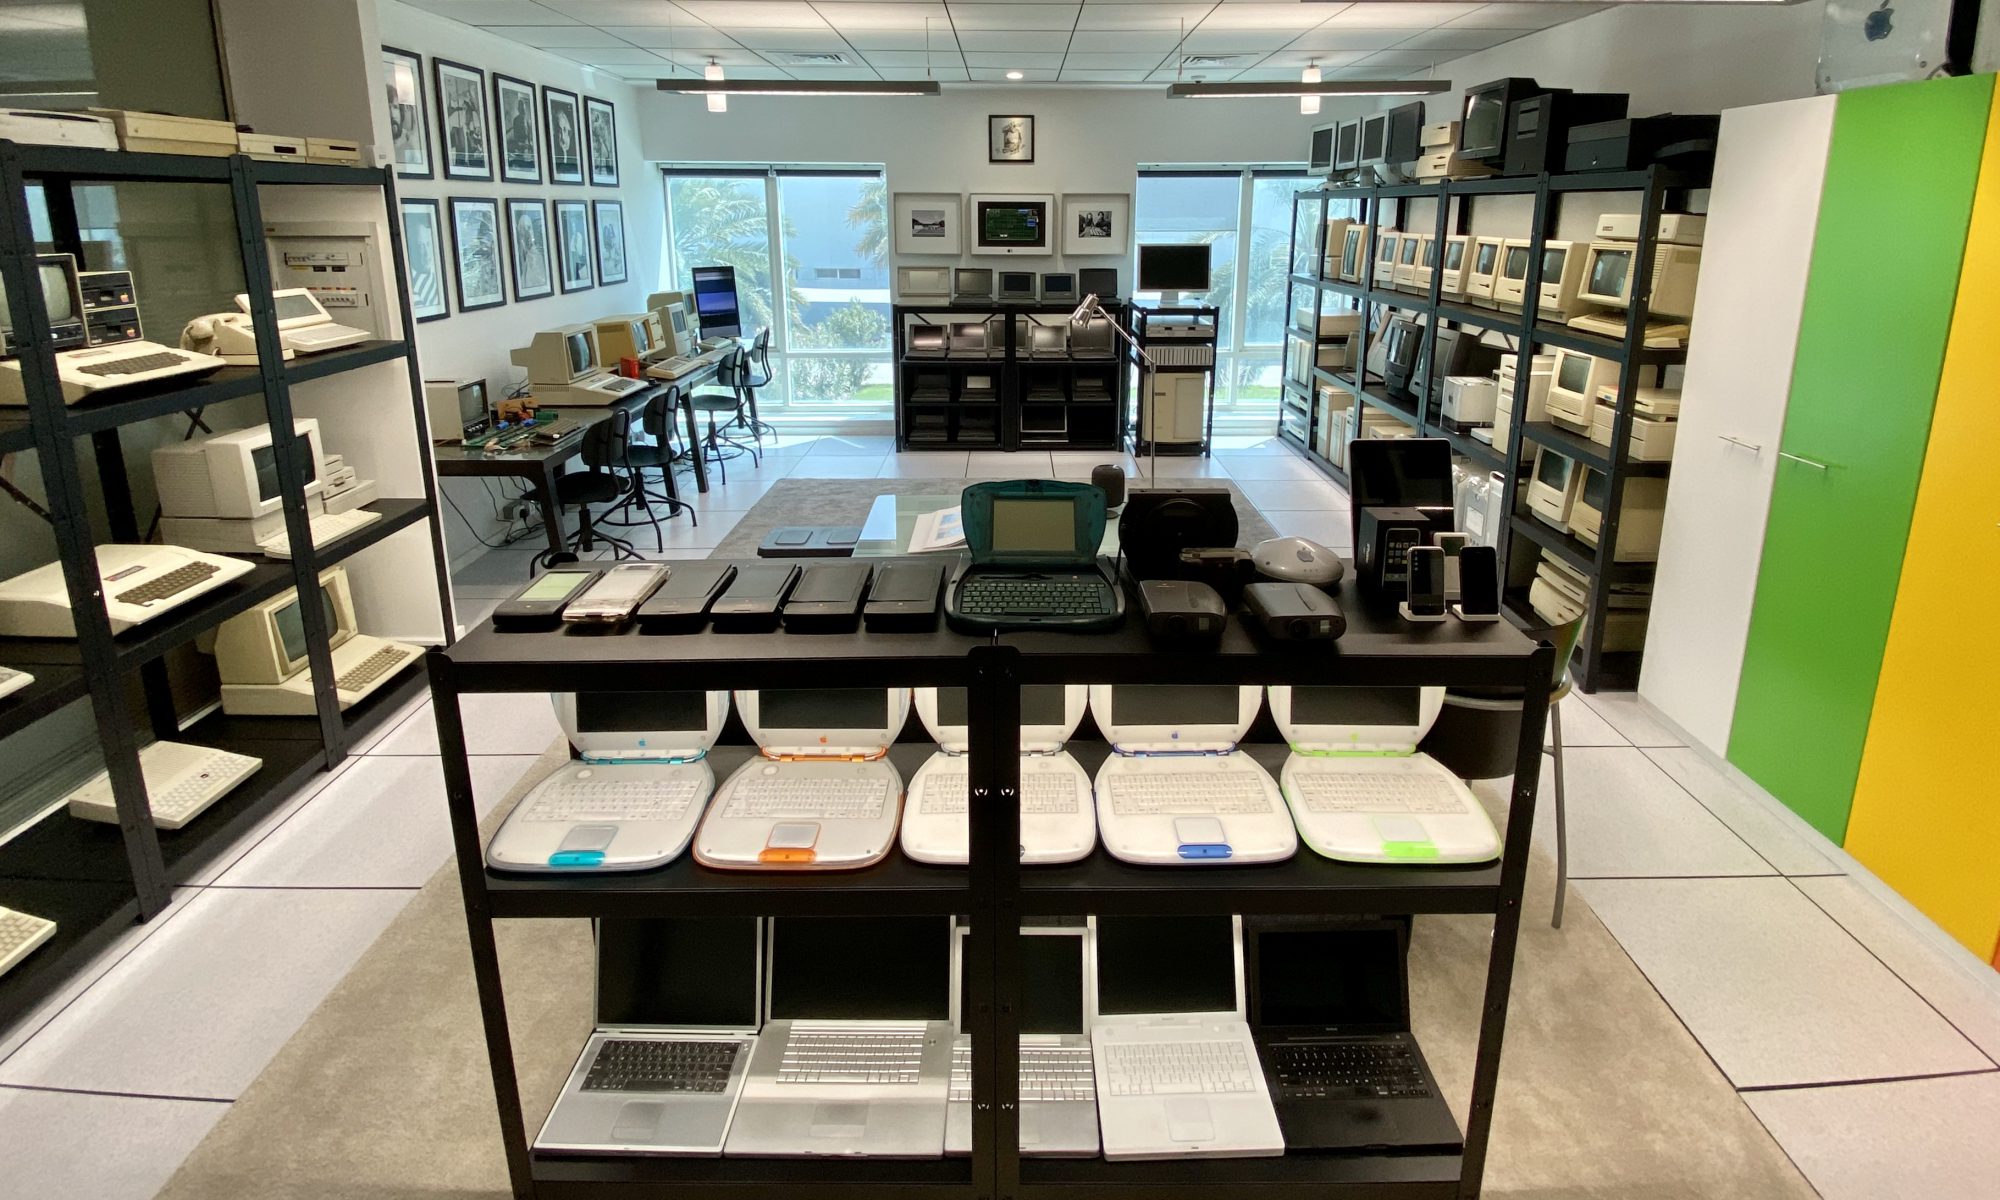 Overview photo of Jimmy Grewal’s collection of vintage Apple computers